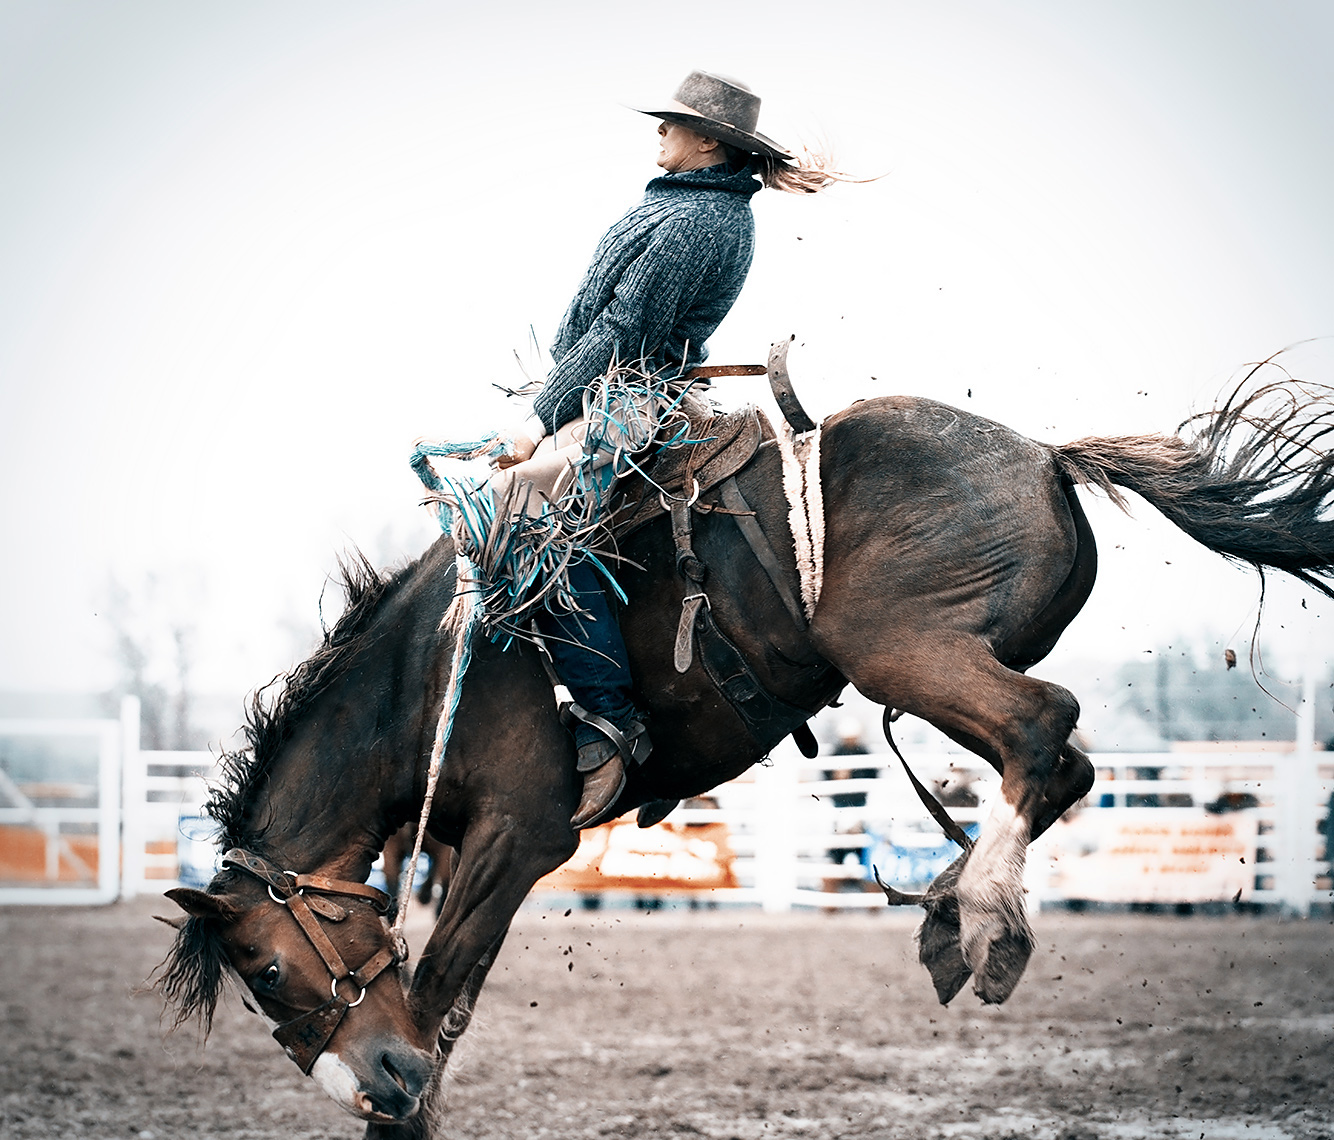 Cowgirl on a bucking horse